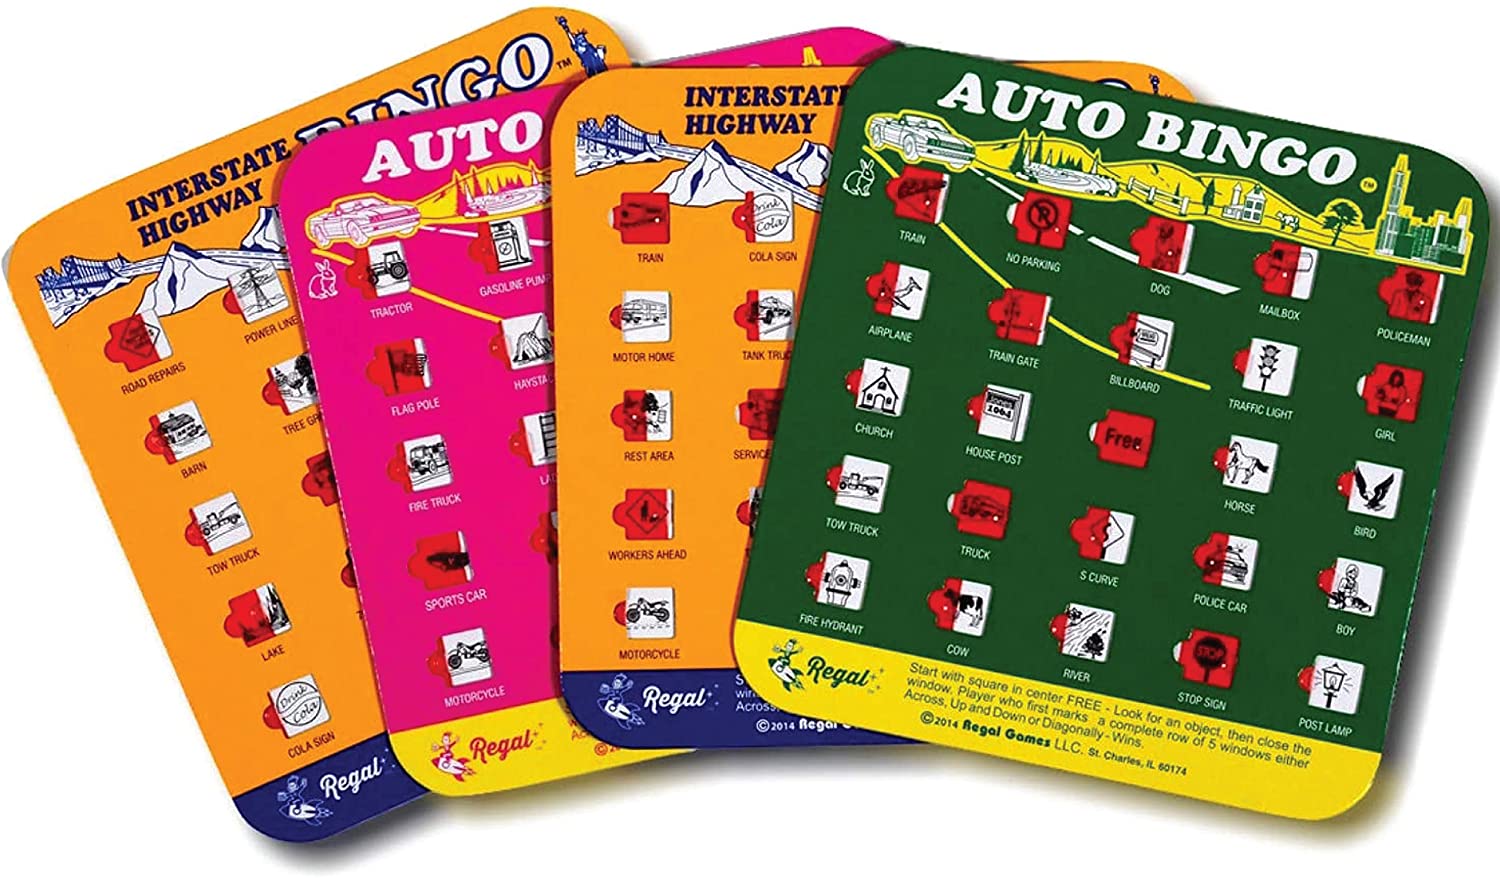 Travel Scavenger Hunt and Auto Bingo Fun Gift... Details about   2 Sets Road Trip Card Games